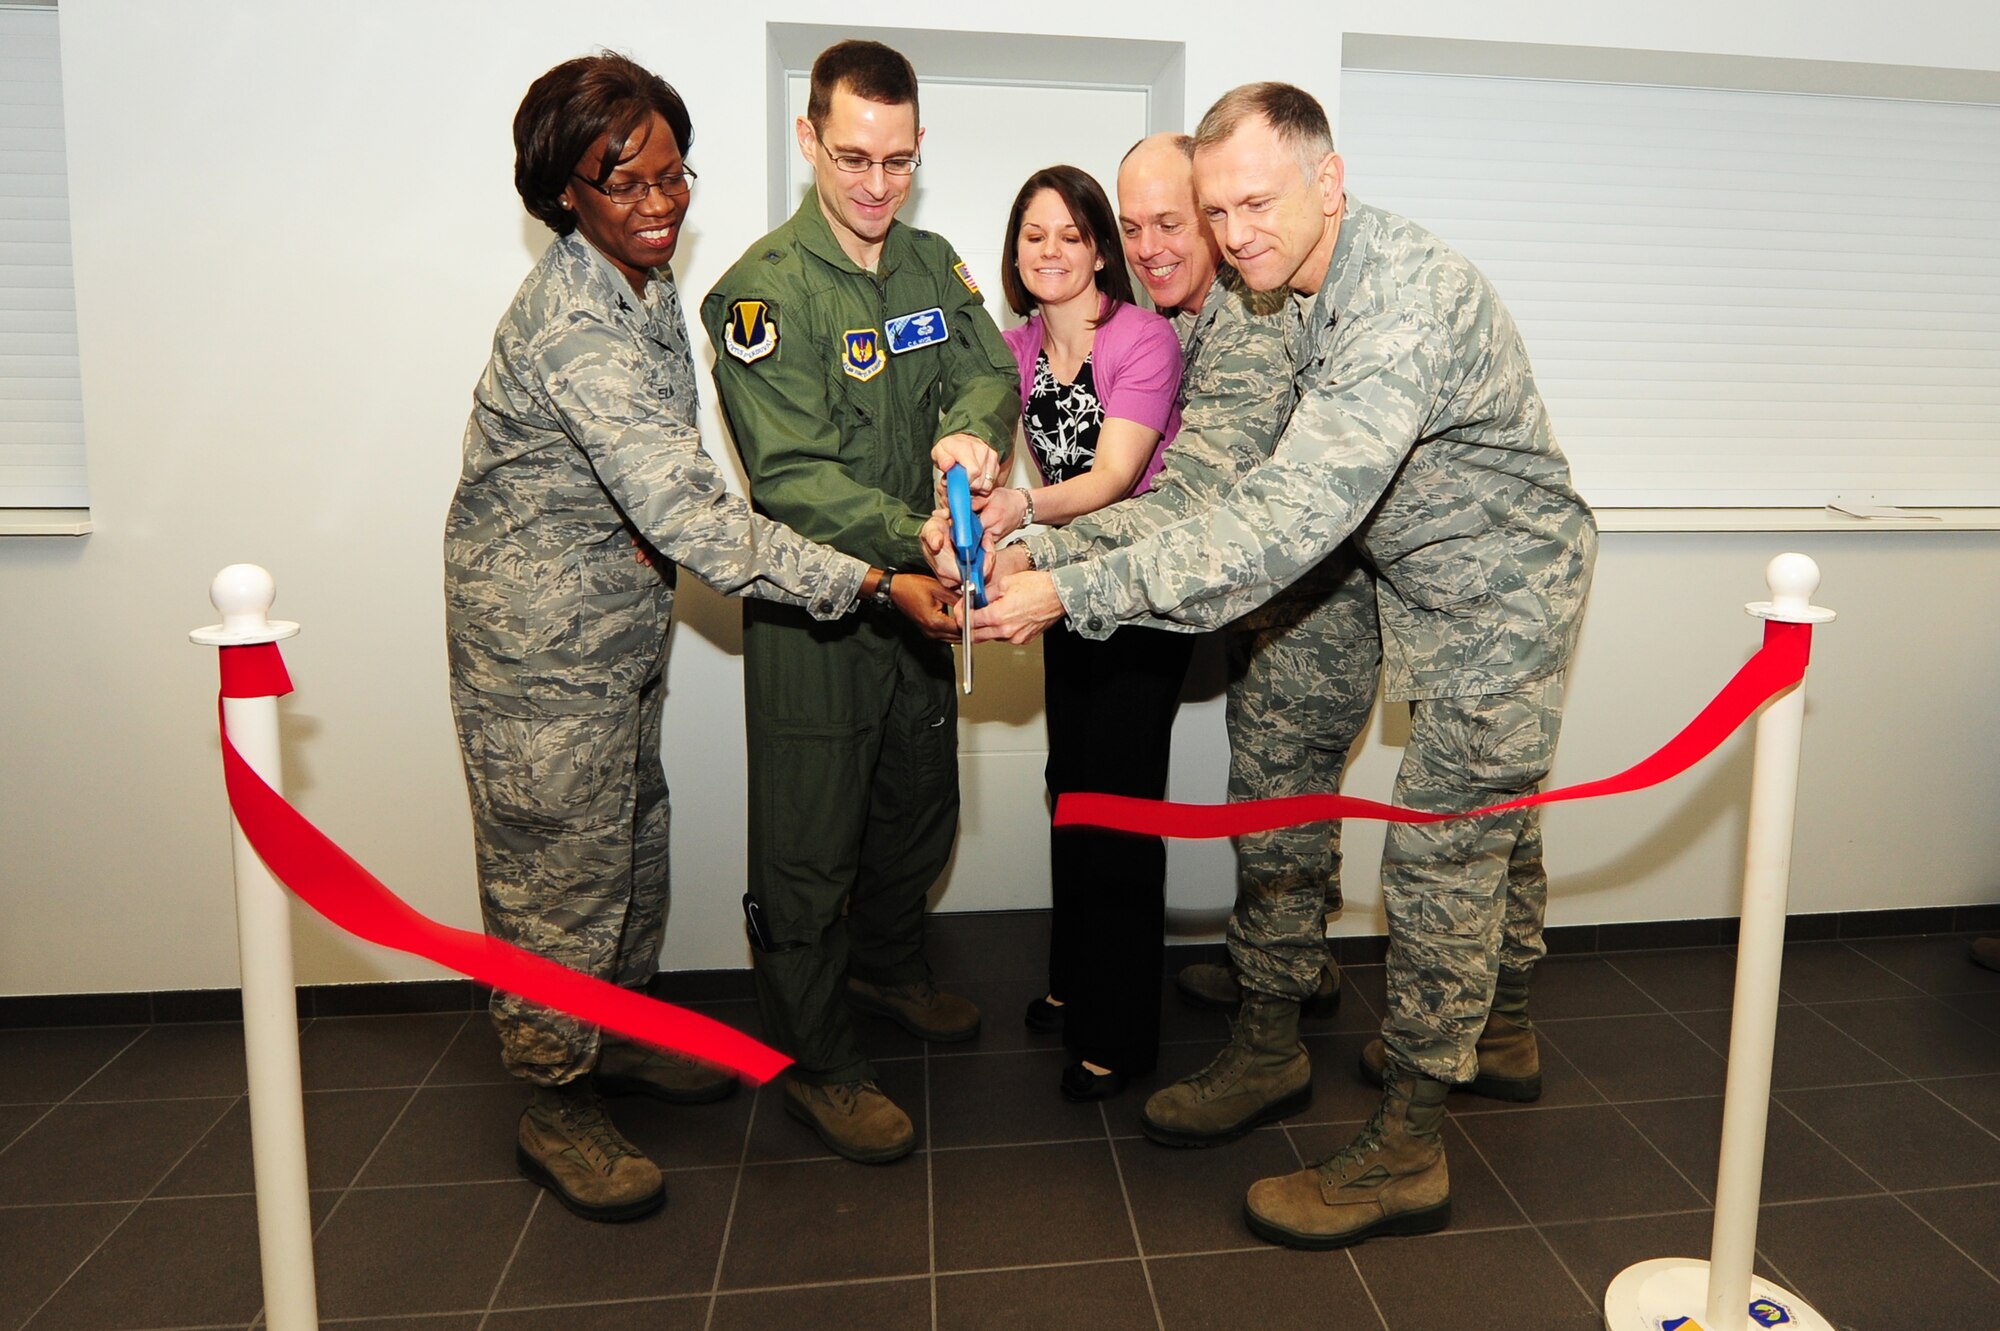 Col. Joycelyn Elaiho, 86th Medical Group commander, Brig. Gen C.K. Hyde, 86th Airlift Wing commander, Morgan McNabb, Drug Demand Reduction programmer, Col. John Shapland, 435th Air Ground Operations Wing commander, and Col. Daniel Reiser, 86th Medical Operation Squadron commander, cut the ribbon at the opening of the new DDR facility, Ramstein Air Base, Germany, Jan. 24, 2012. The new DDR facility took six months to complete and is located in the South Side Fitness Center Annex. (U.S. Air Force photo by Senior Airman Aaron-Forrest Wainwright)